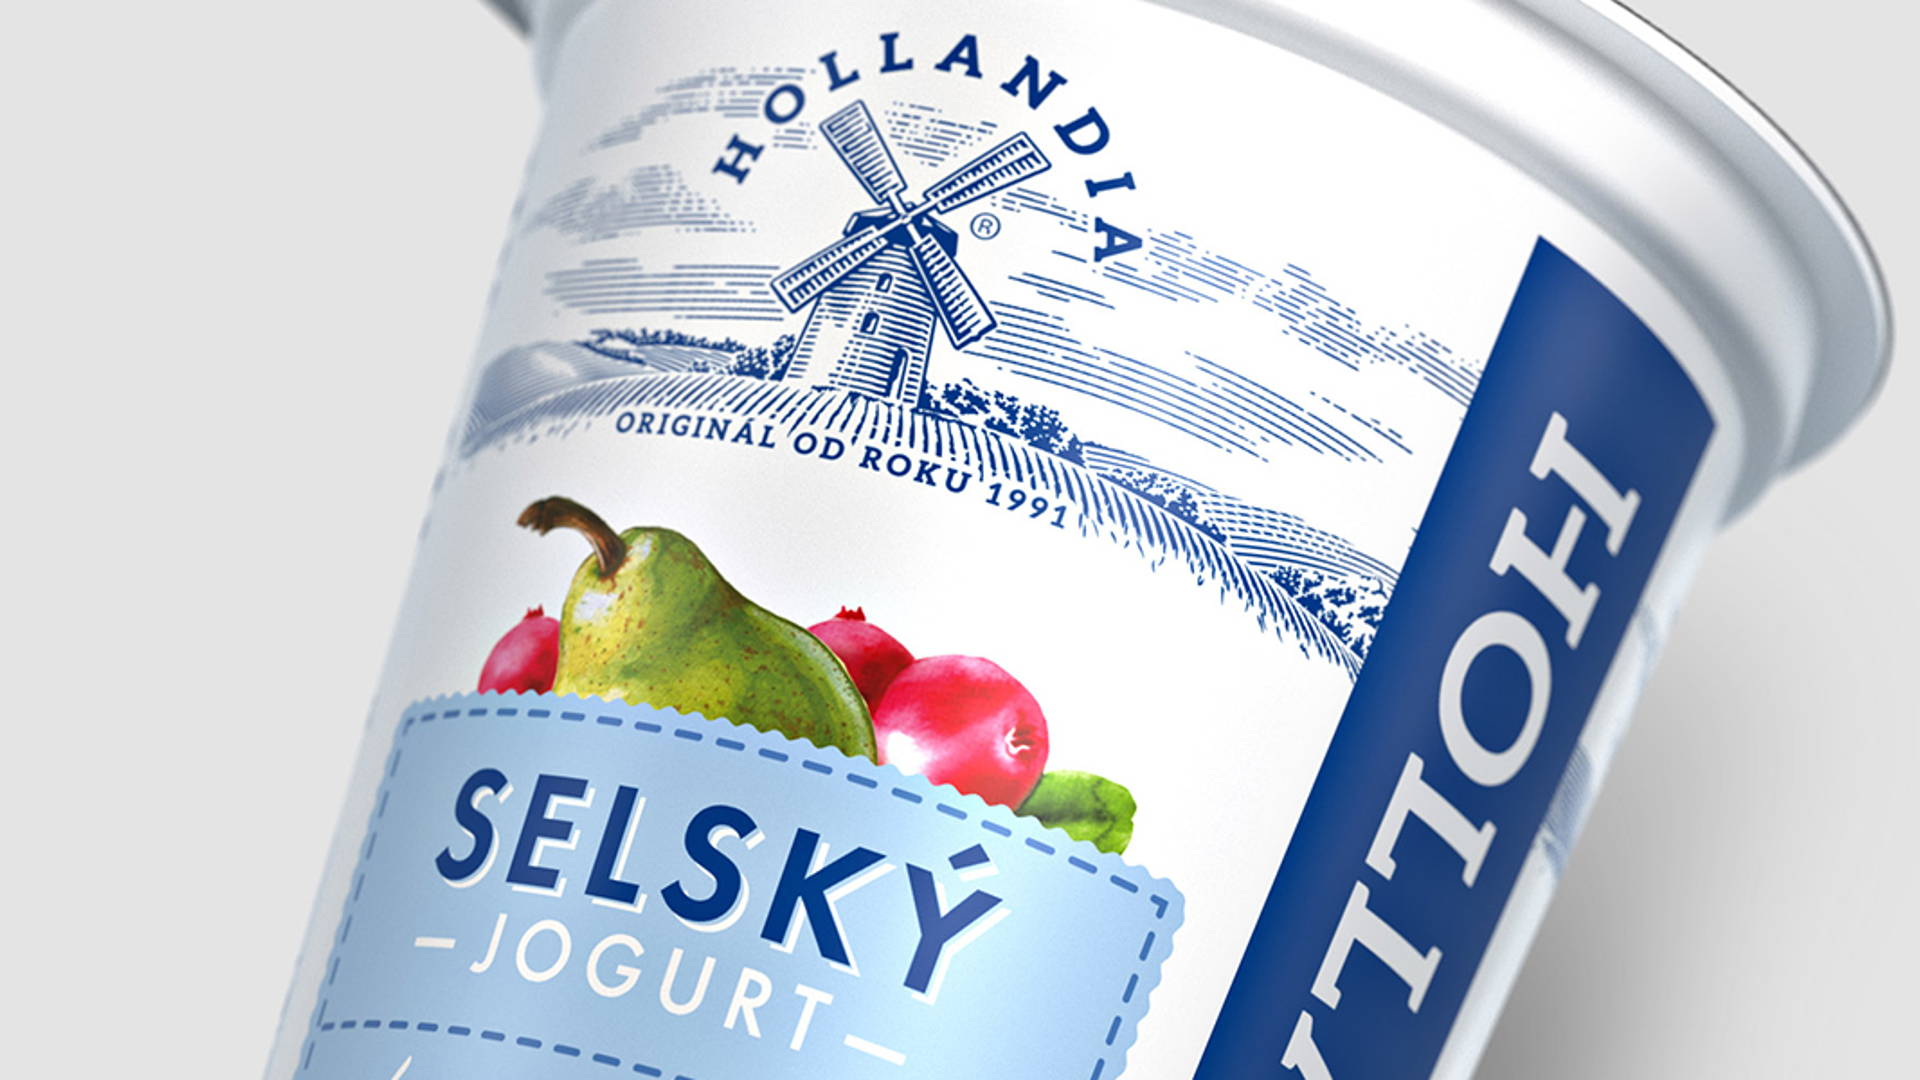 Featured image for Hollandia refreshed: The Czech lovebrand's bold makeover